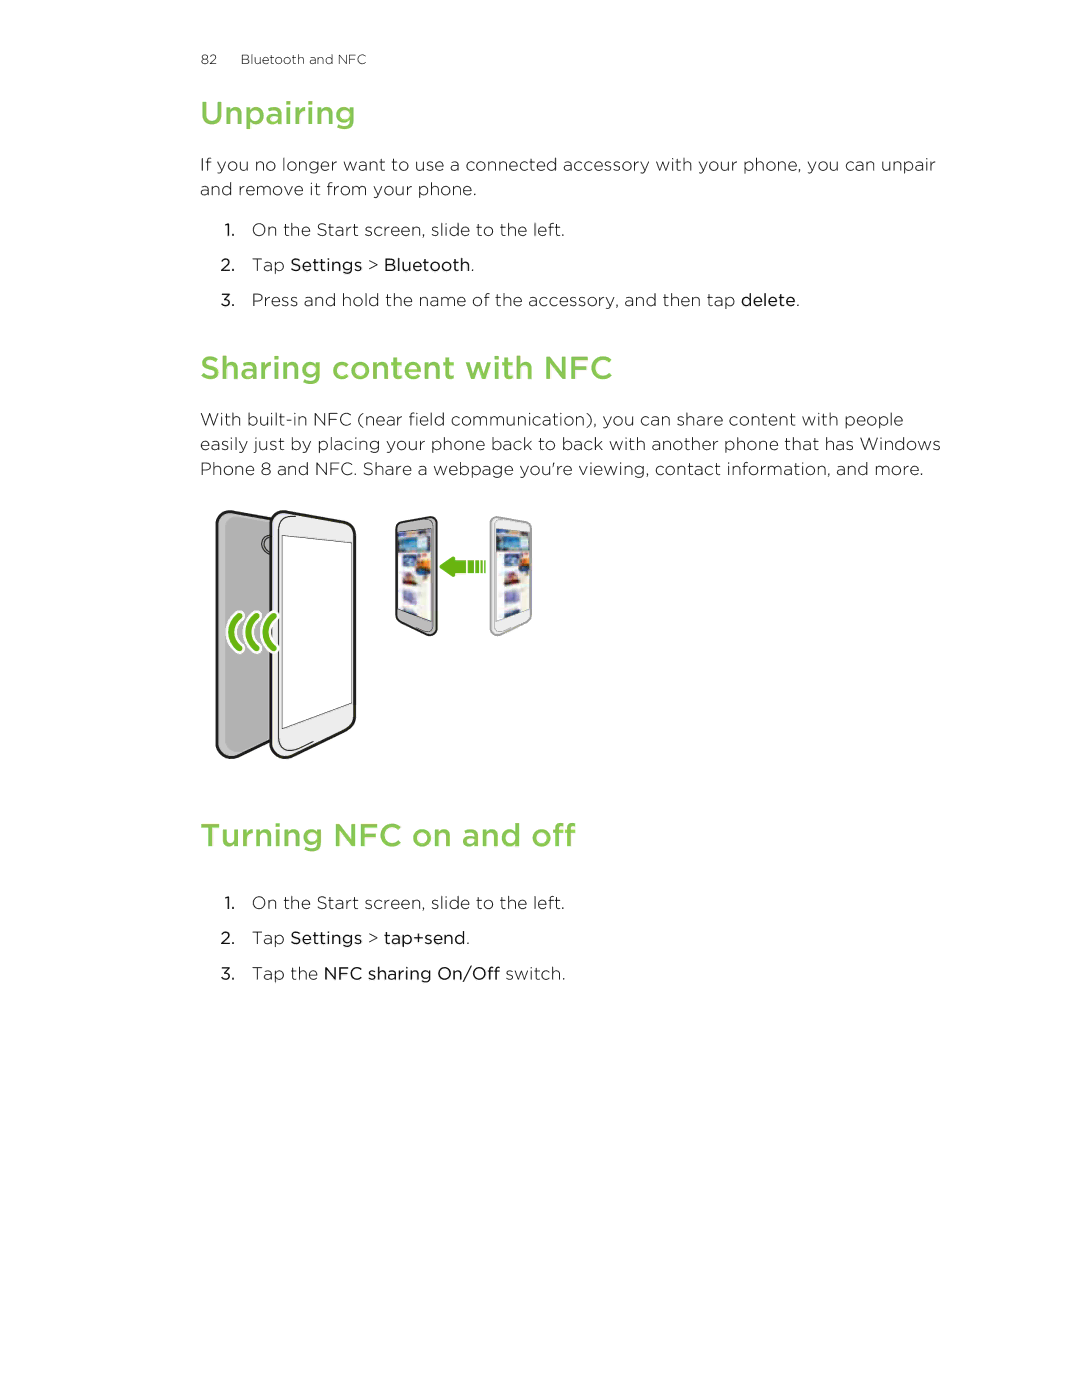 HTC 8X manual Unpairing, Sharing content with NFC, Turning NFC on and off 